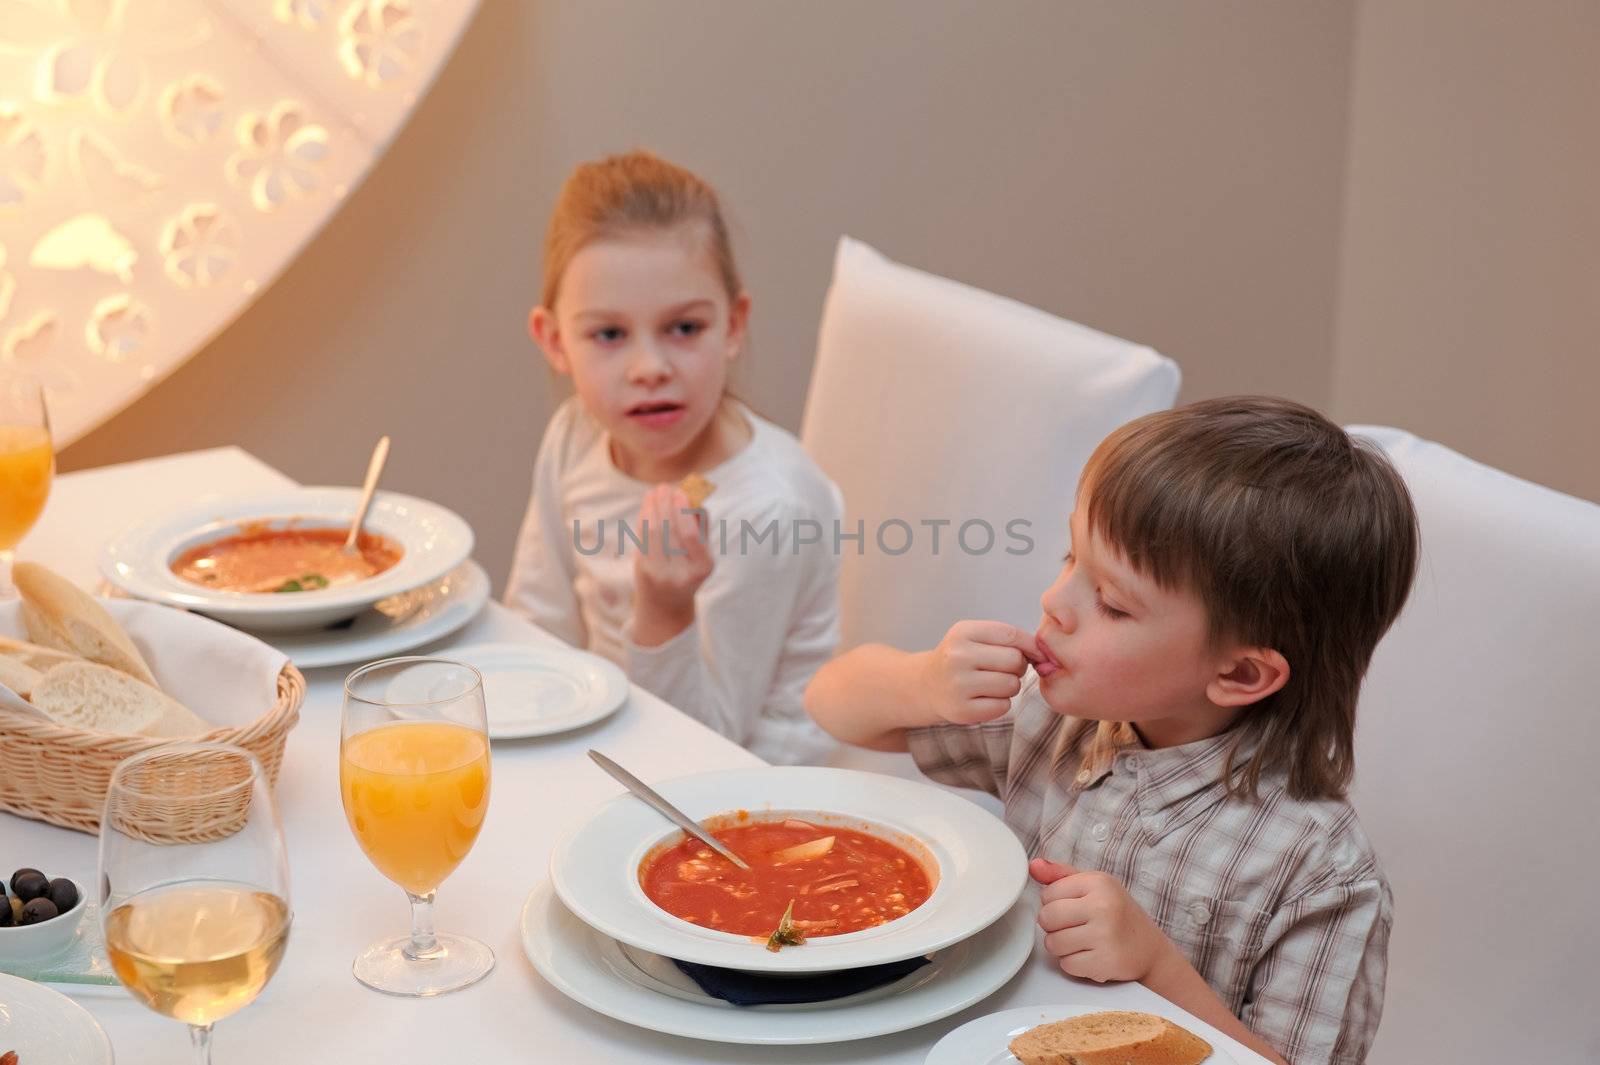 Sister and brother enjoying meal sitting at restaurant table. Boy in focus, girl out of focus.